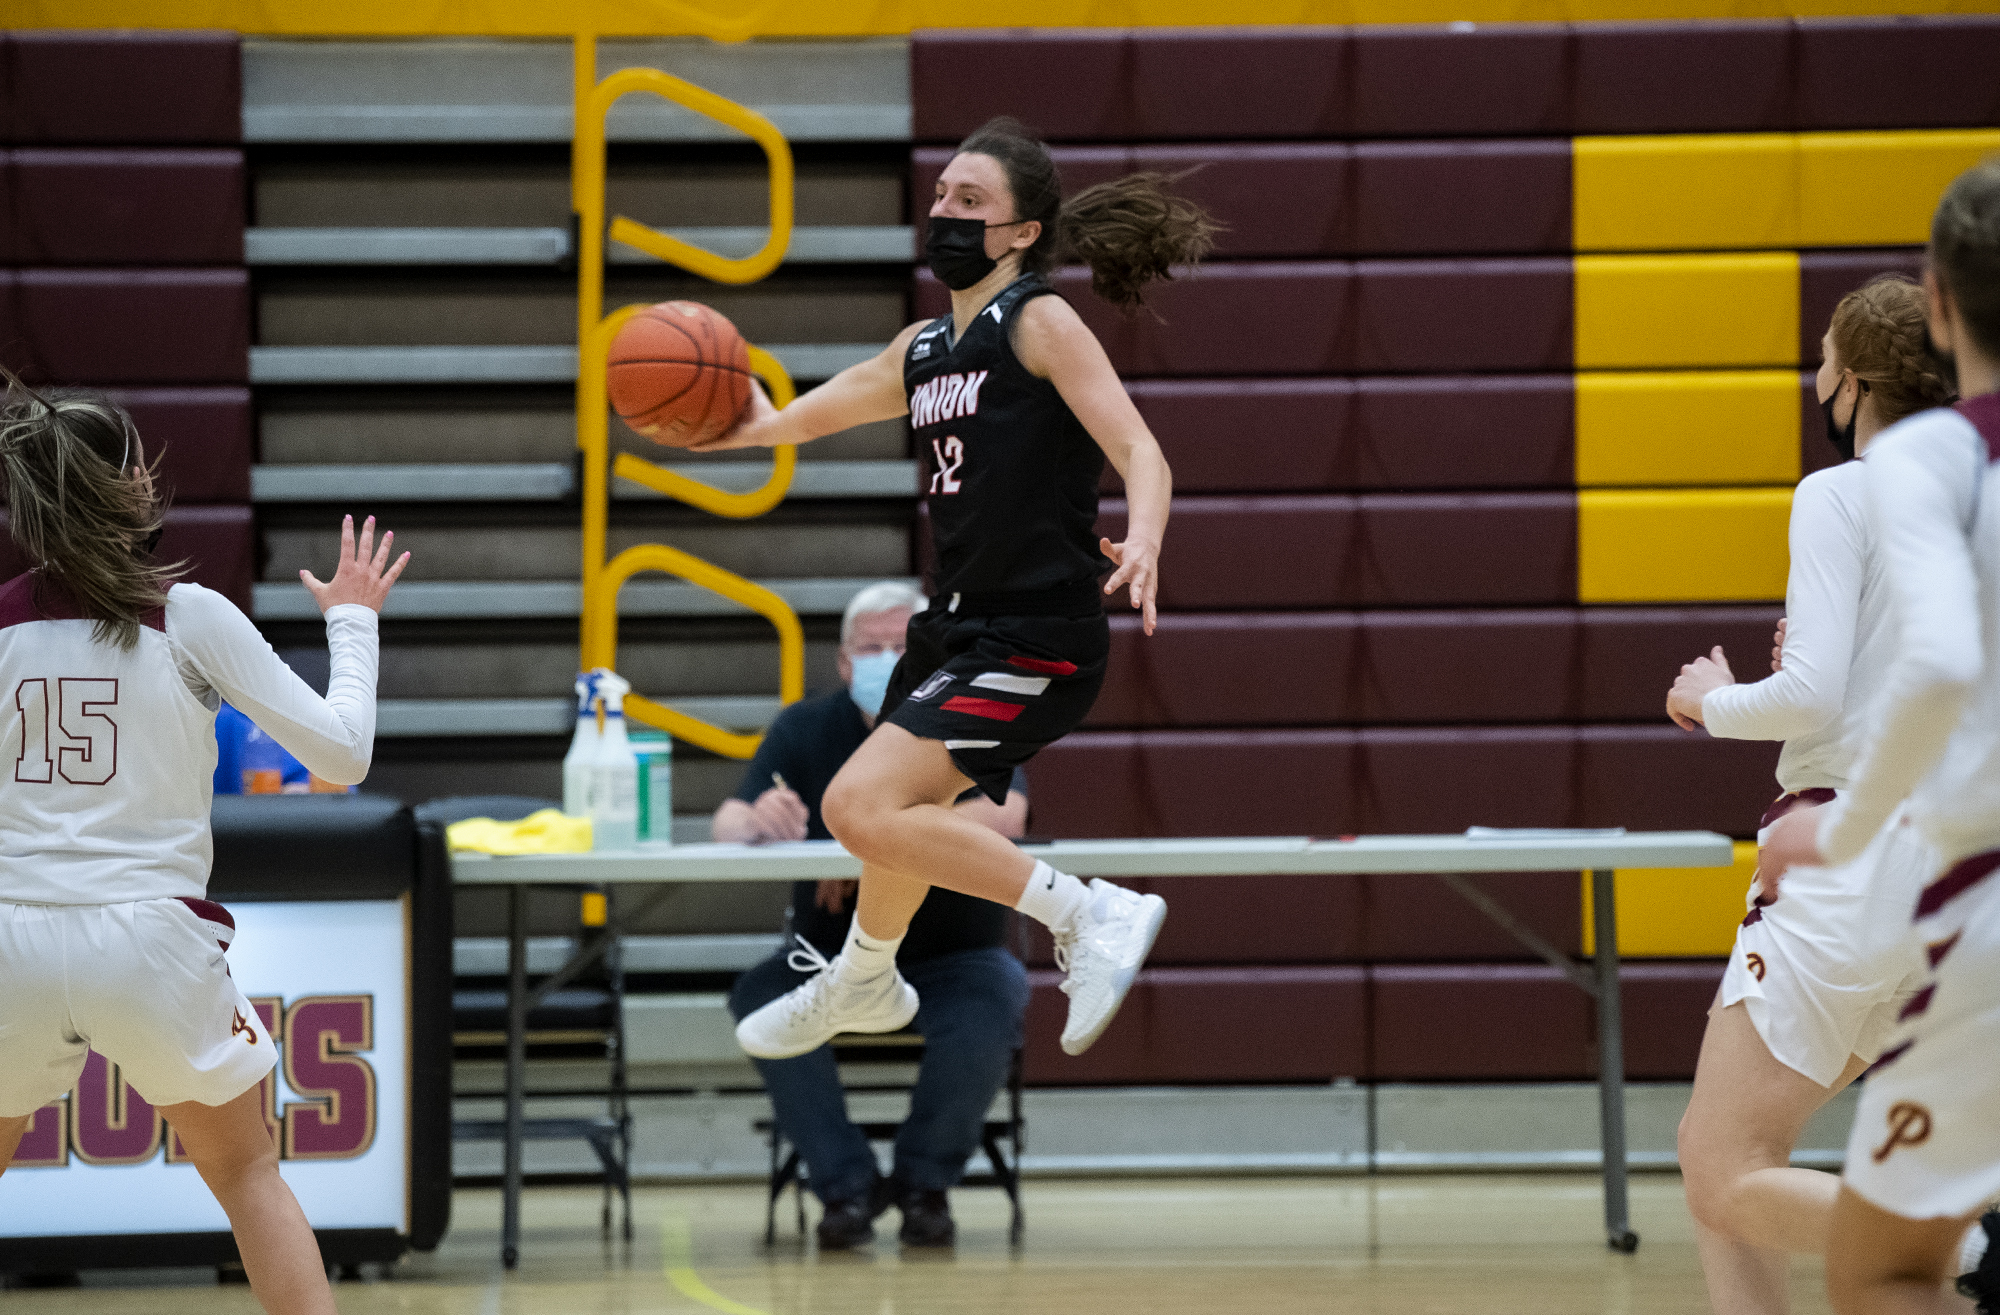 Union’s Abbey Kaip leaps to save the ball from going out of bounds in a 4A/3A Greater St. Helens League girls basketball game on Thursday, April 22, 2021, at Prairie High School. Union won 50-46.